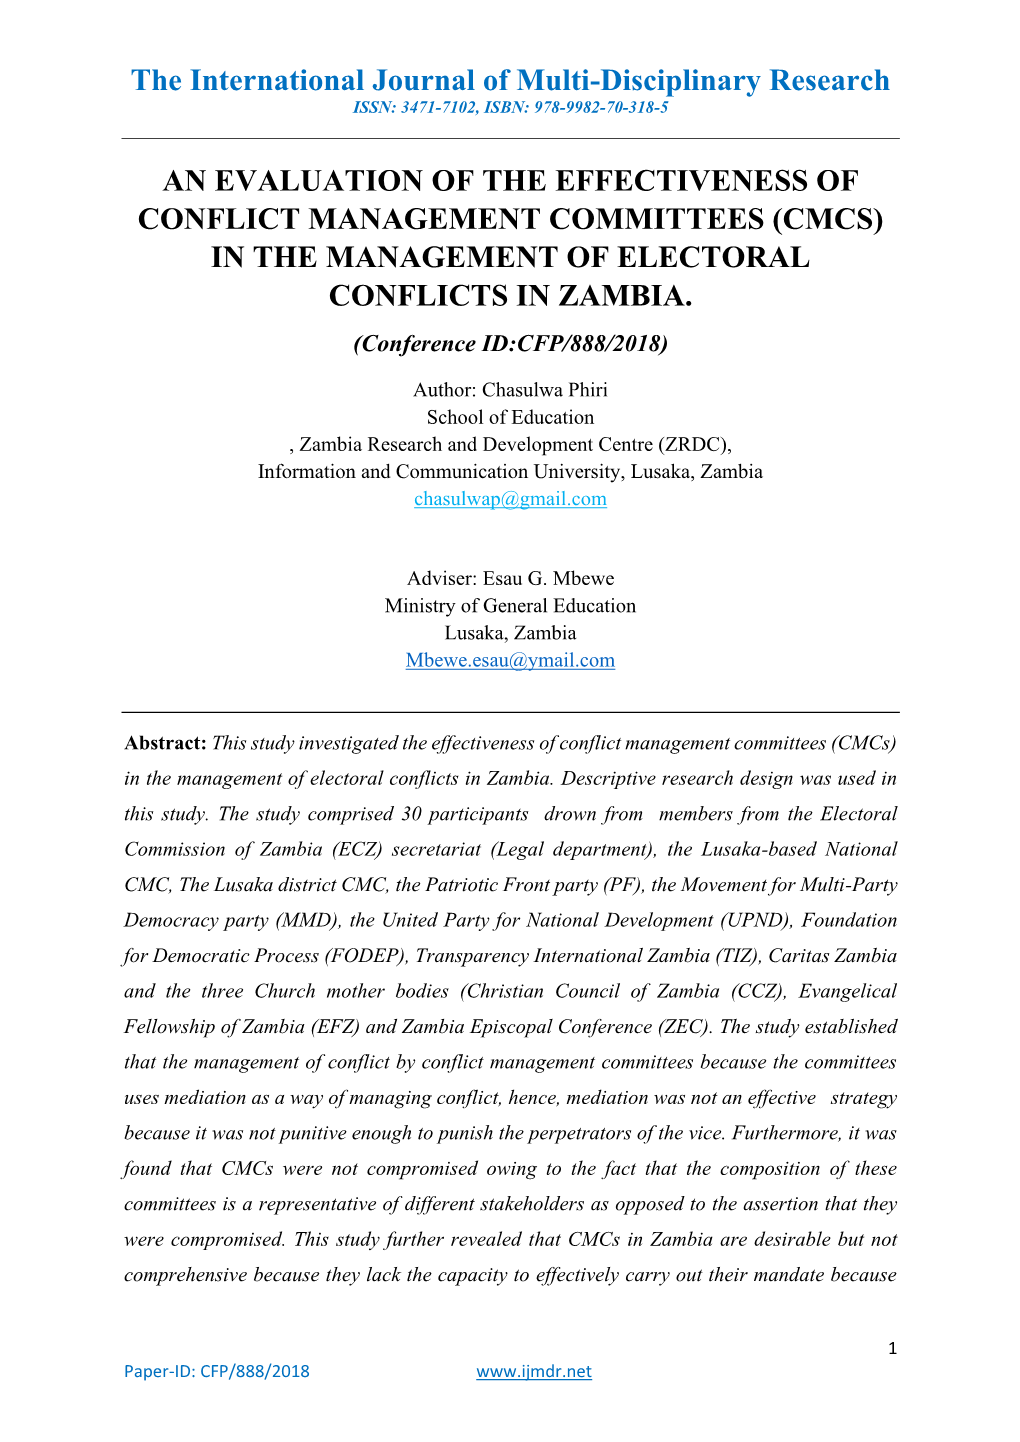 An Evaluation of the Effectiveness of Conflict Management Committees (Cmcs) in the Management of Electoral Conflicts in Zambia